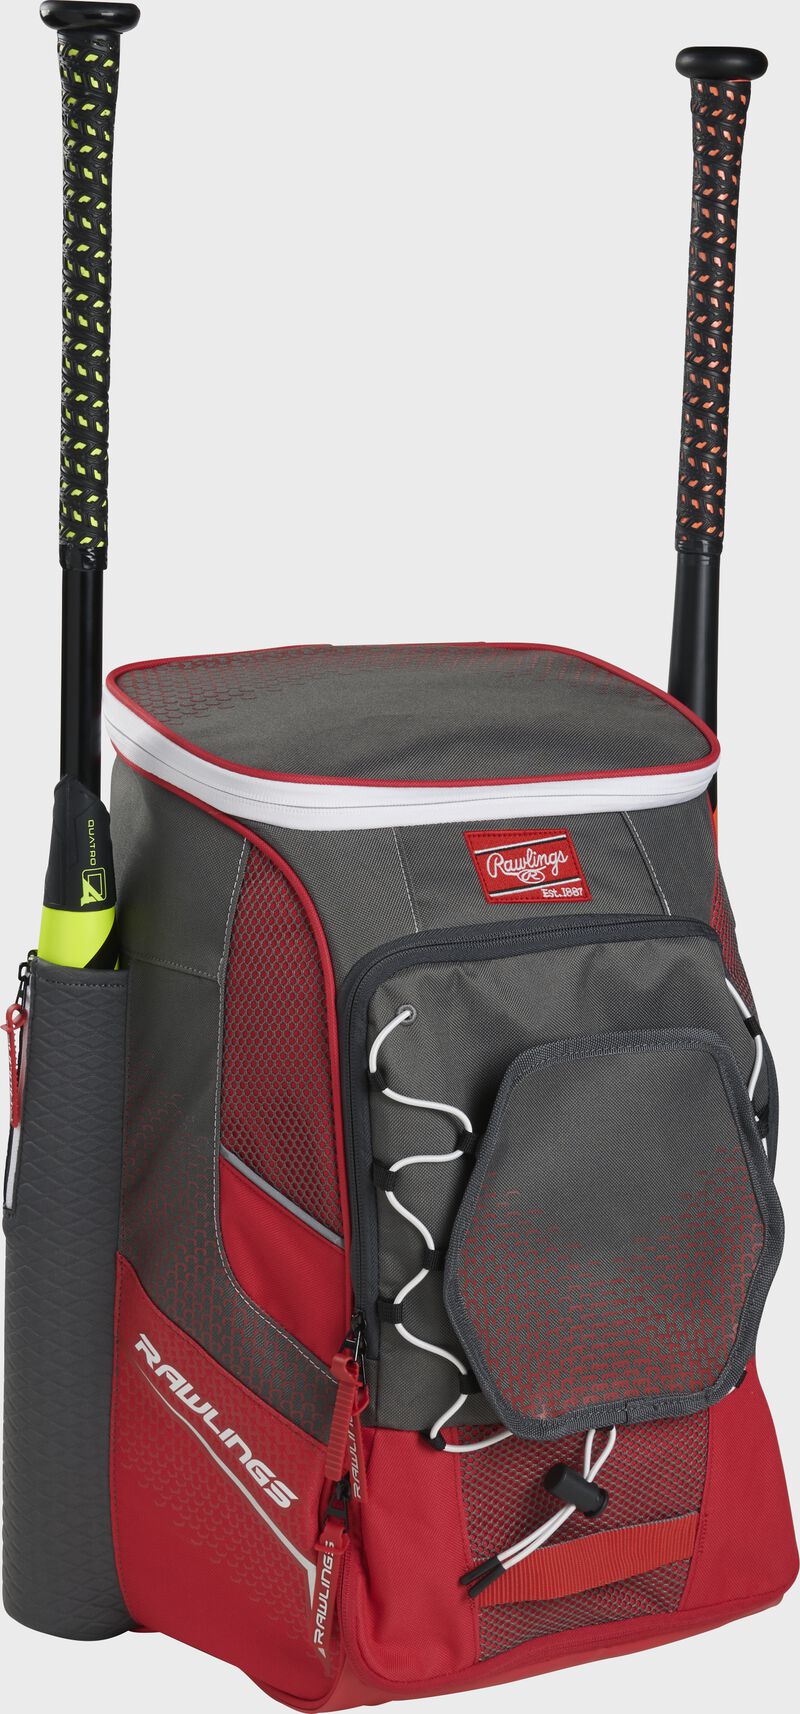 Front left angle of a scarlet Rawlings Impulse baseball gear backpack with two bats - SKU: IMPLSE-S